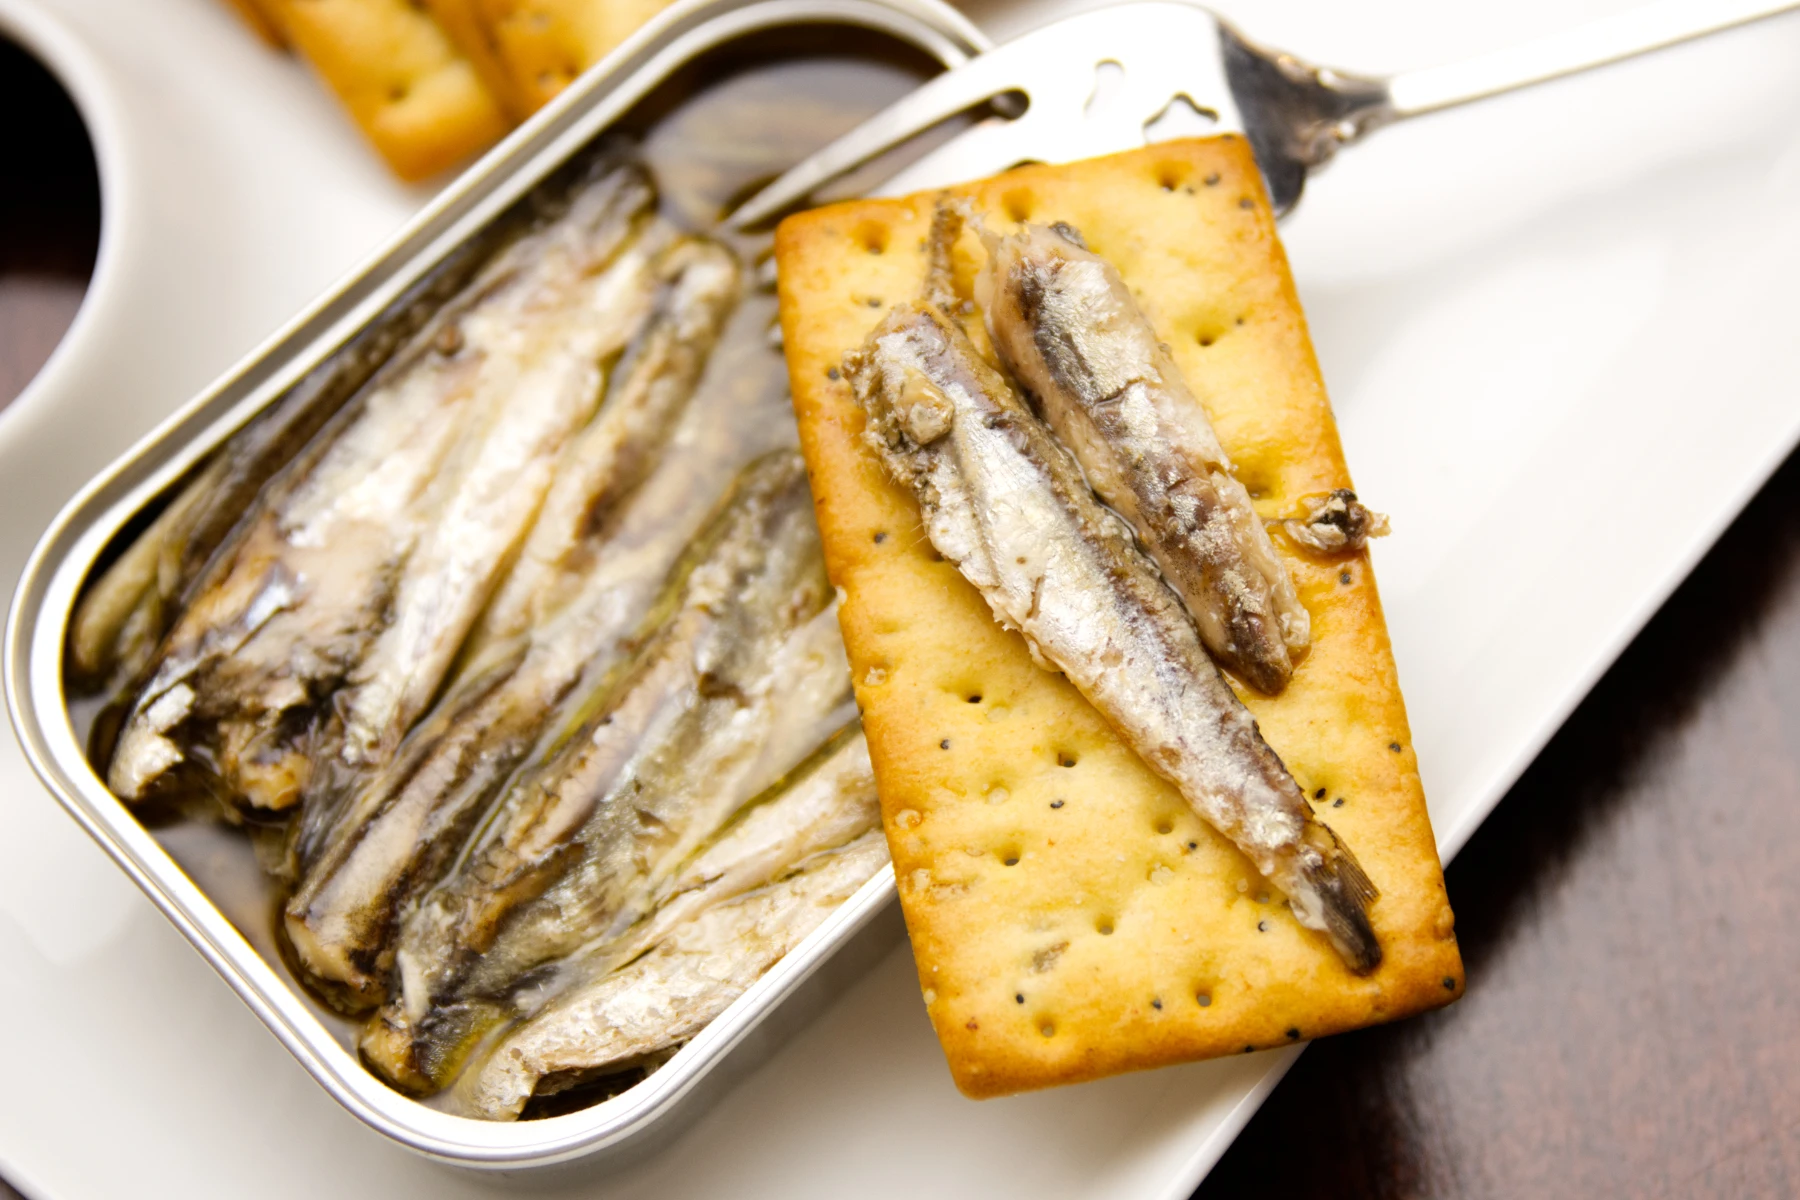 A couple pieces of anchovies on a cracker with the rest of the tin in the background.